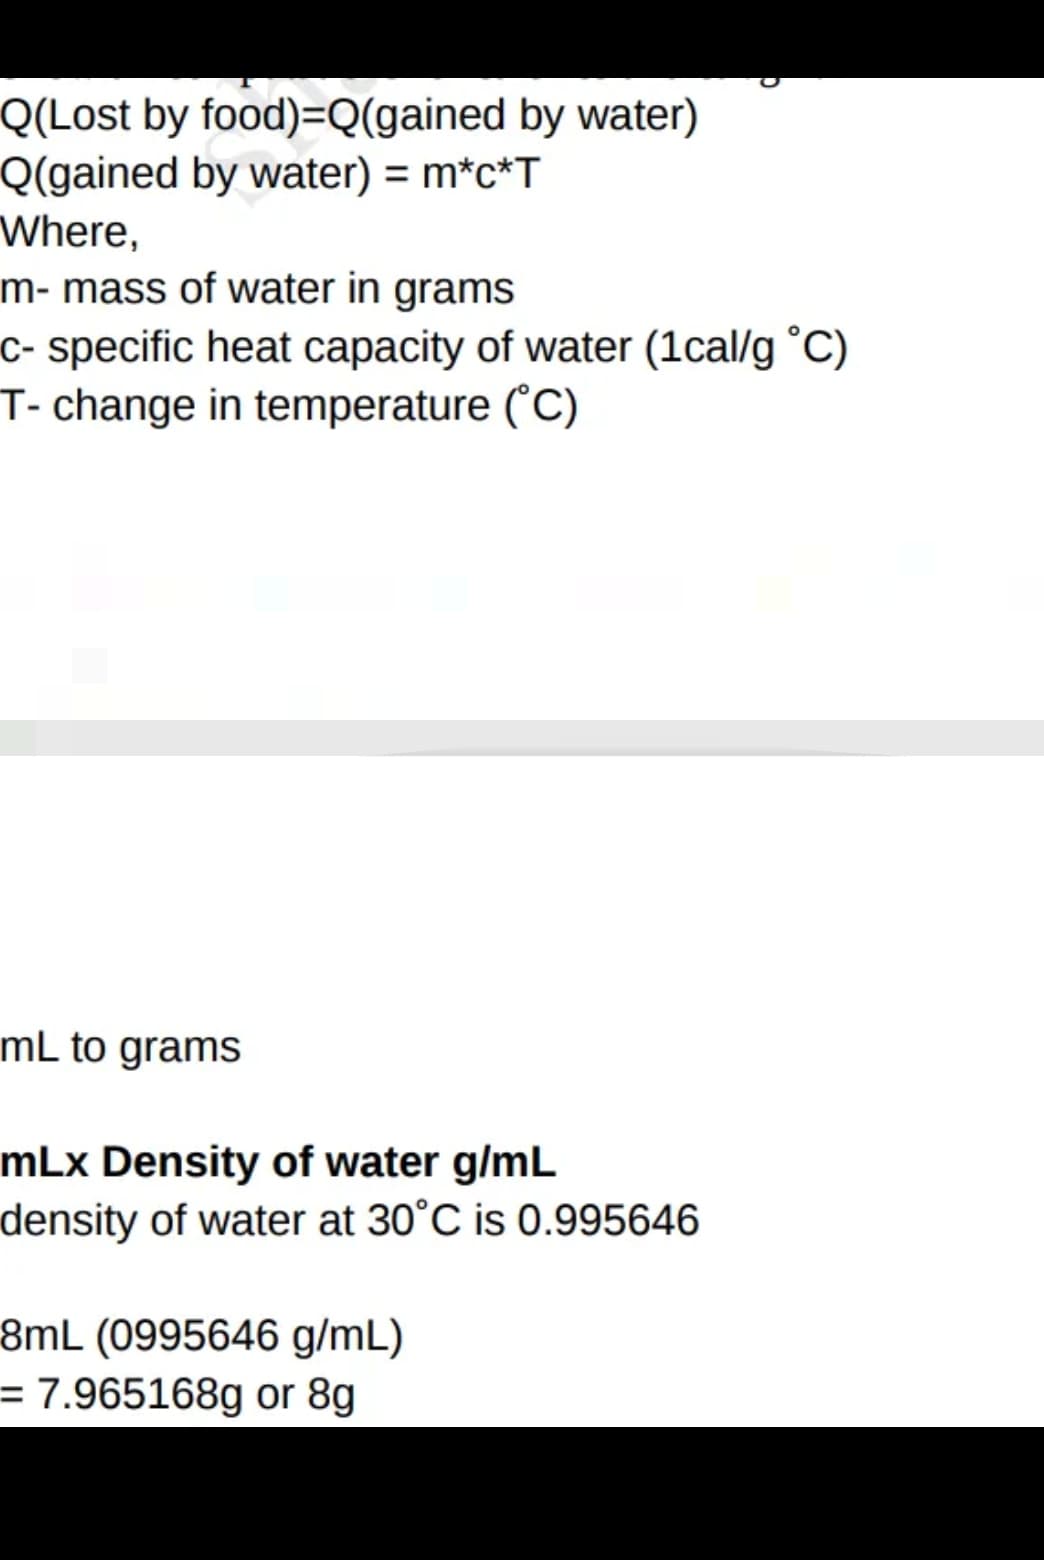 Q(Lost by food)=Q(gained by water)
Q(gained by water) = m*c*T
Where,
m- mass of water in grams
c- specific heat capacity of water (1cal/g °C)
T- change in temperature ("C)
mL to grams
mLx Density of water g/mL
density of water at 30°C is 0.995646
8mL (0995646 g/mL)
= 7.965168g or 8g
